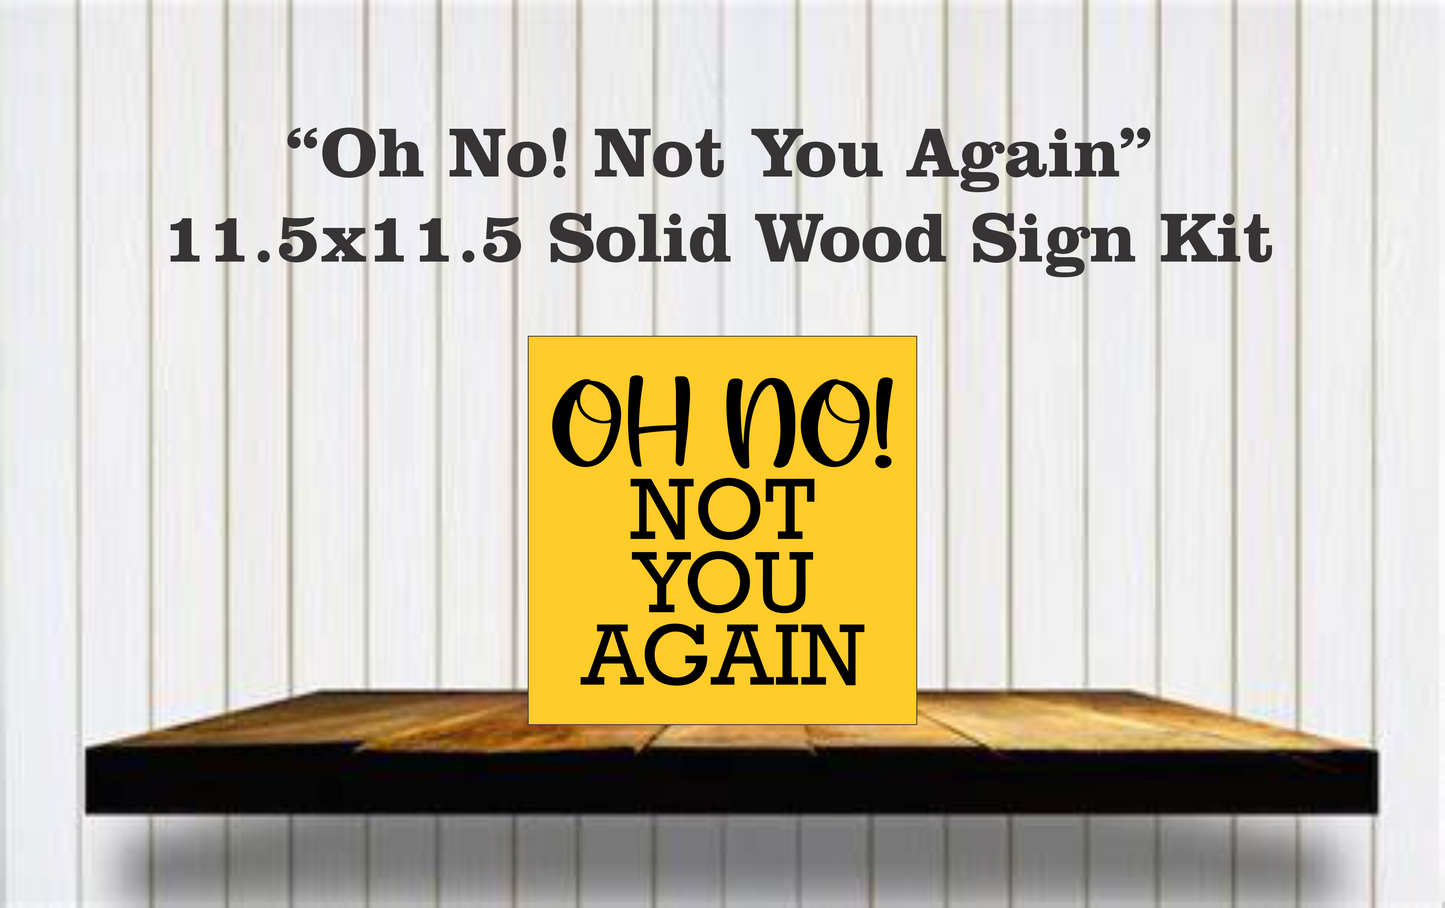 Not You Again! Round Sign Kit